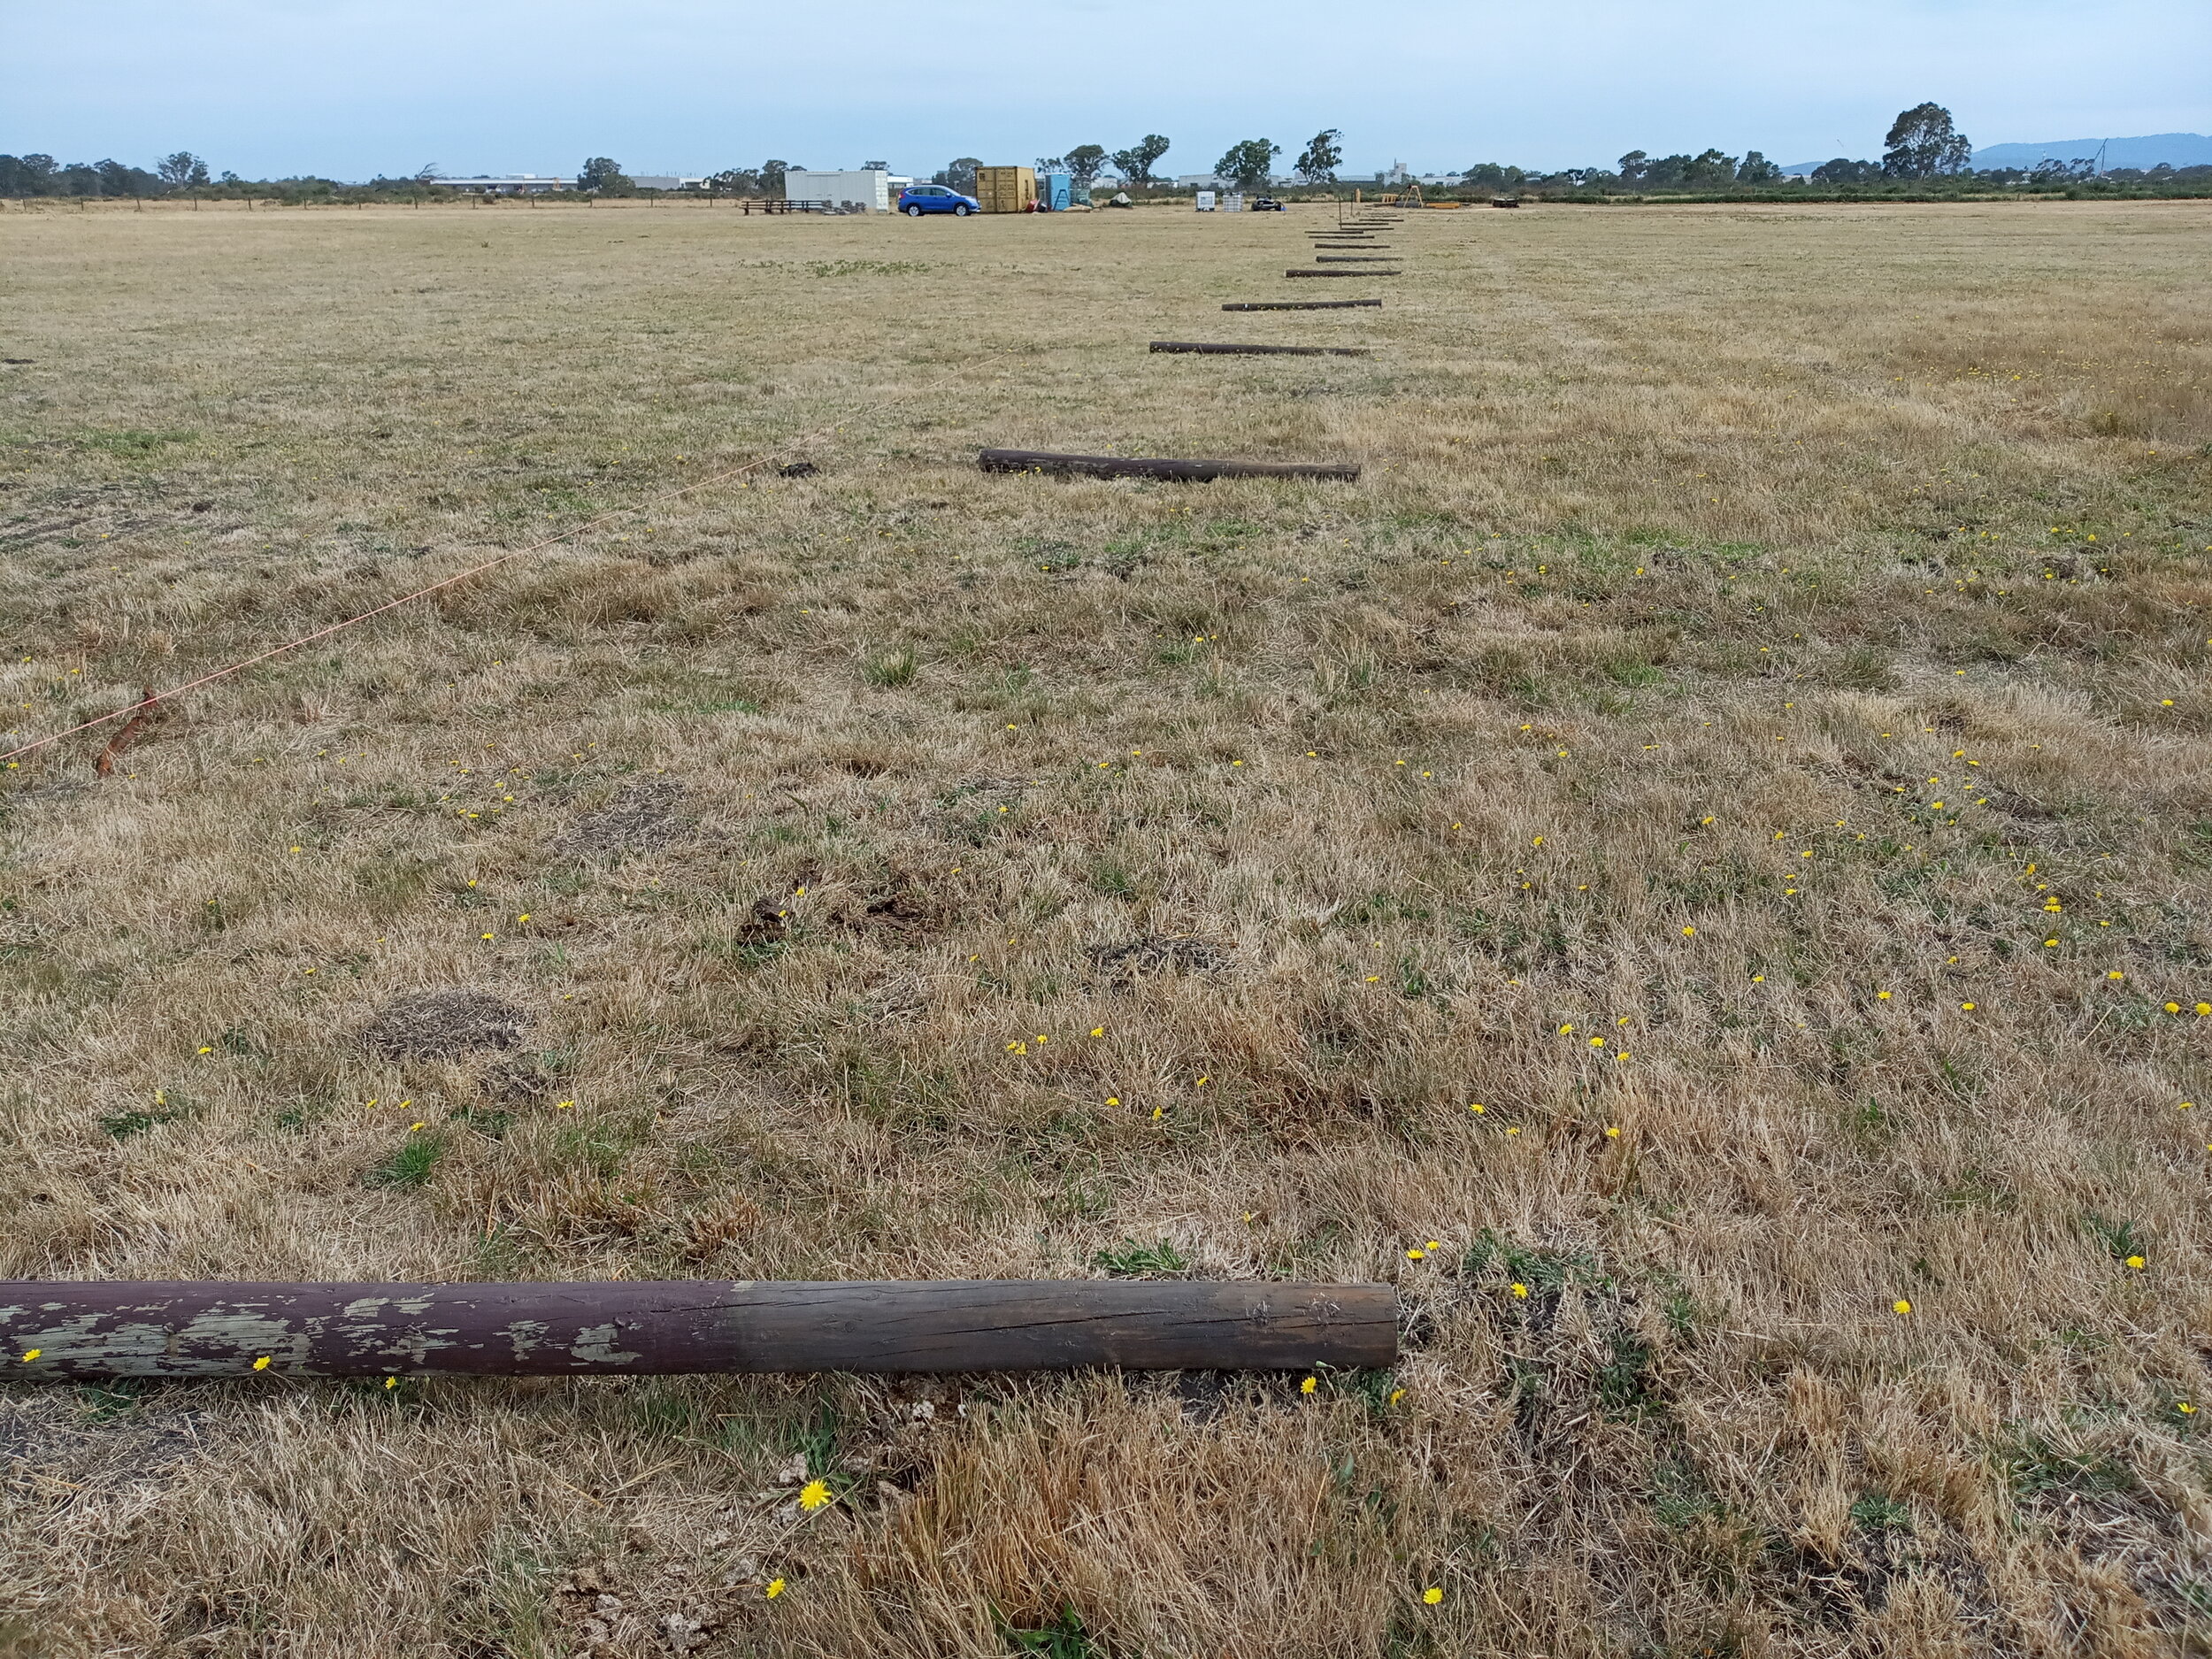  28/1  Posts laid out by Brendon in readiness for the 31/1 Working Bee 